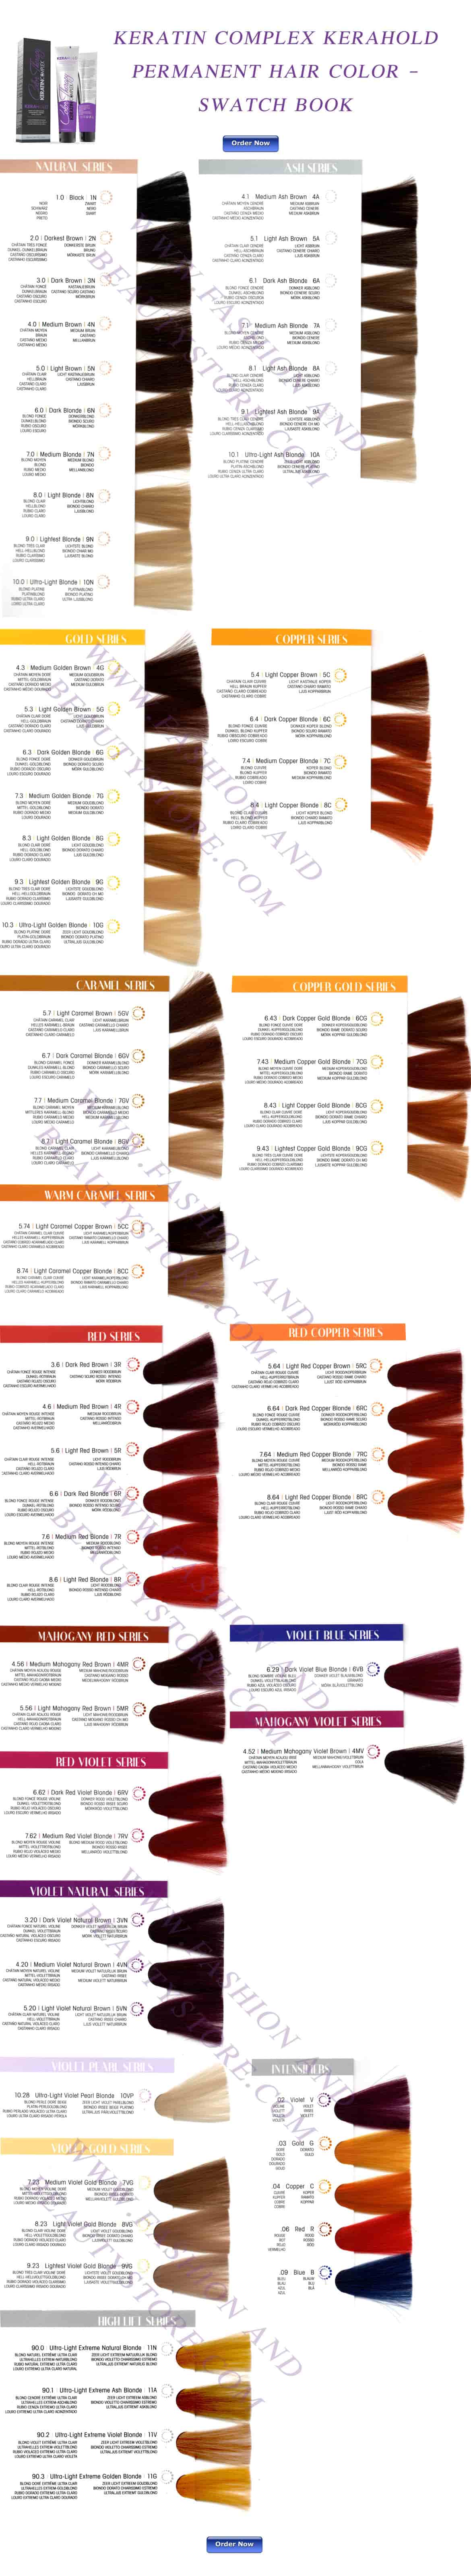 Keratin Complex Kerahold Permanent Hair Color Swatch Book